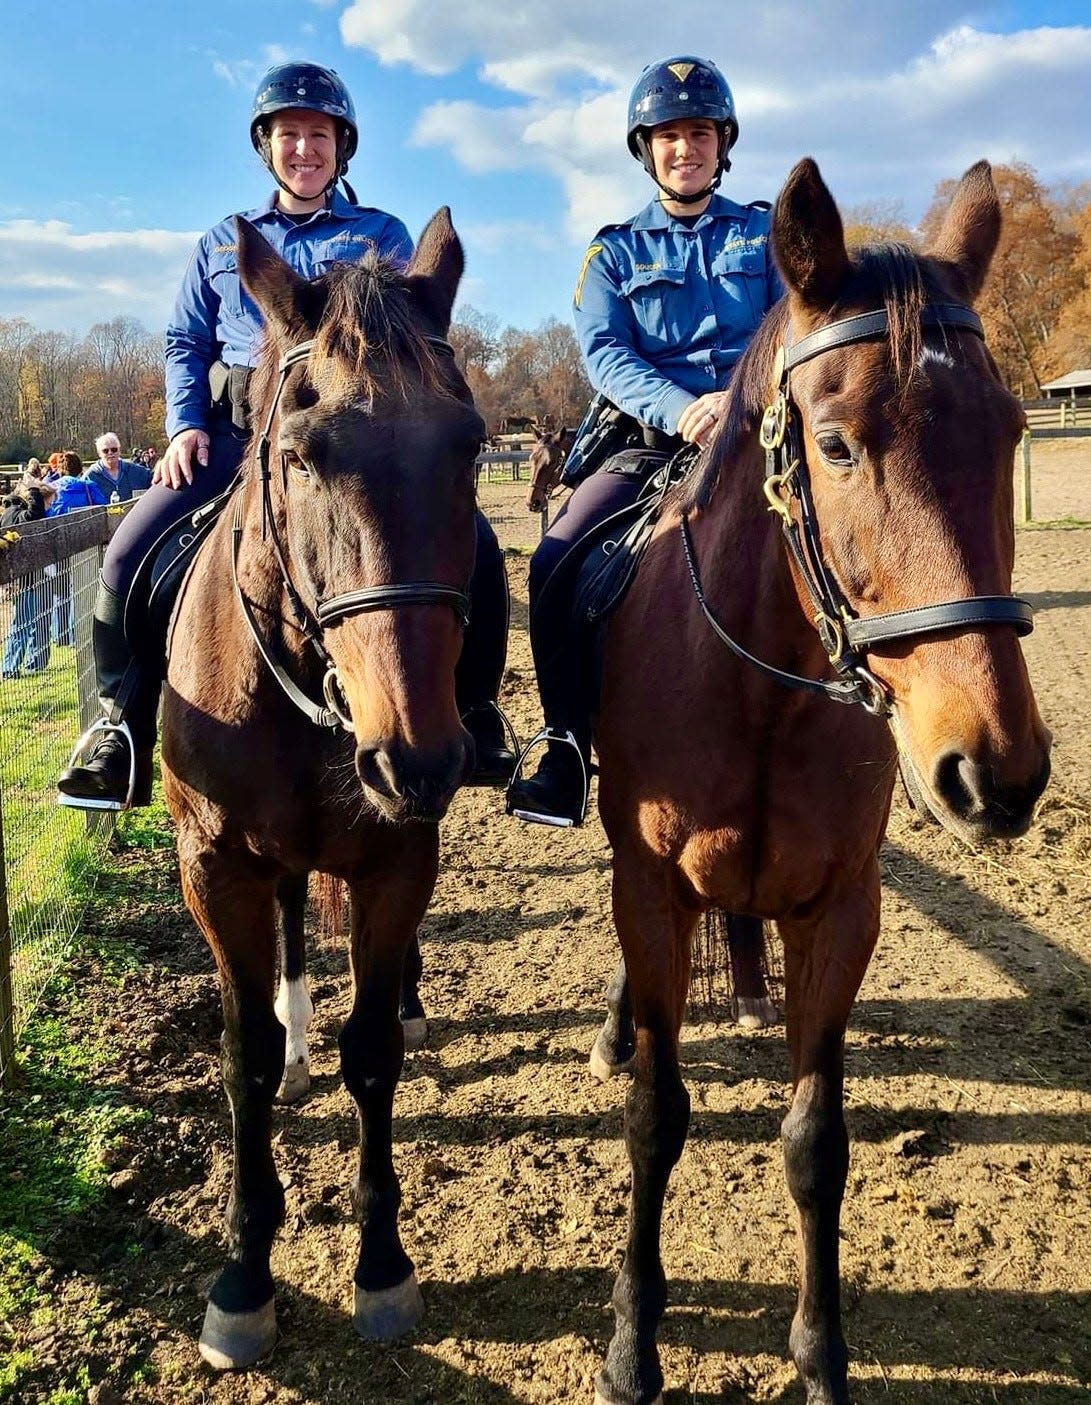 Police horses visit the Standardbred Retirement Foundation, a nonprofit based at a rescue farm in Upper Freehold. These former racehorses, now at work with law enforcement, had been rescued from slaughterhouses by the foundation.